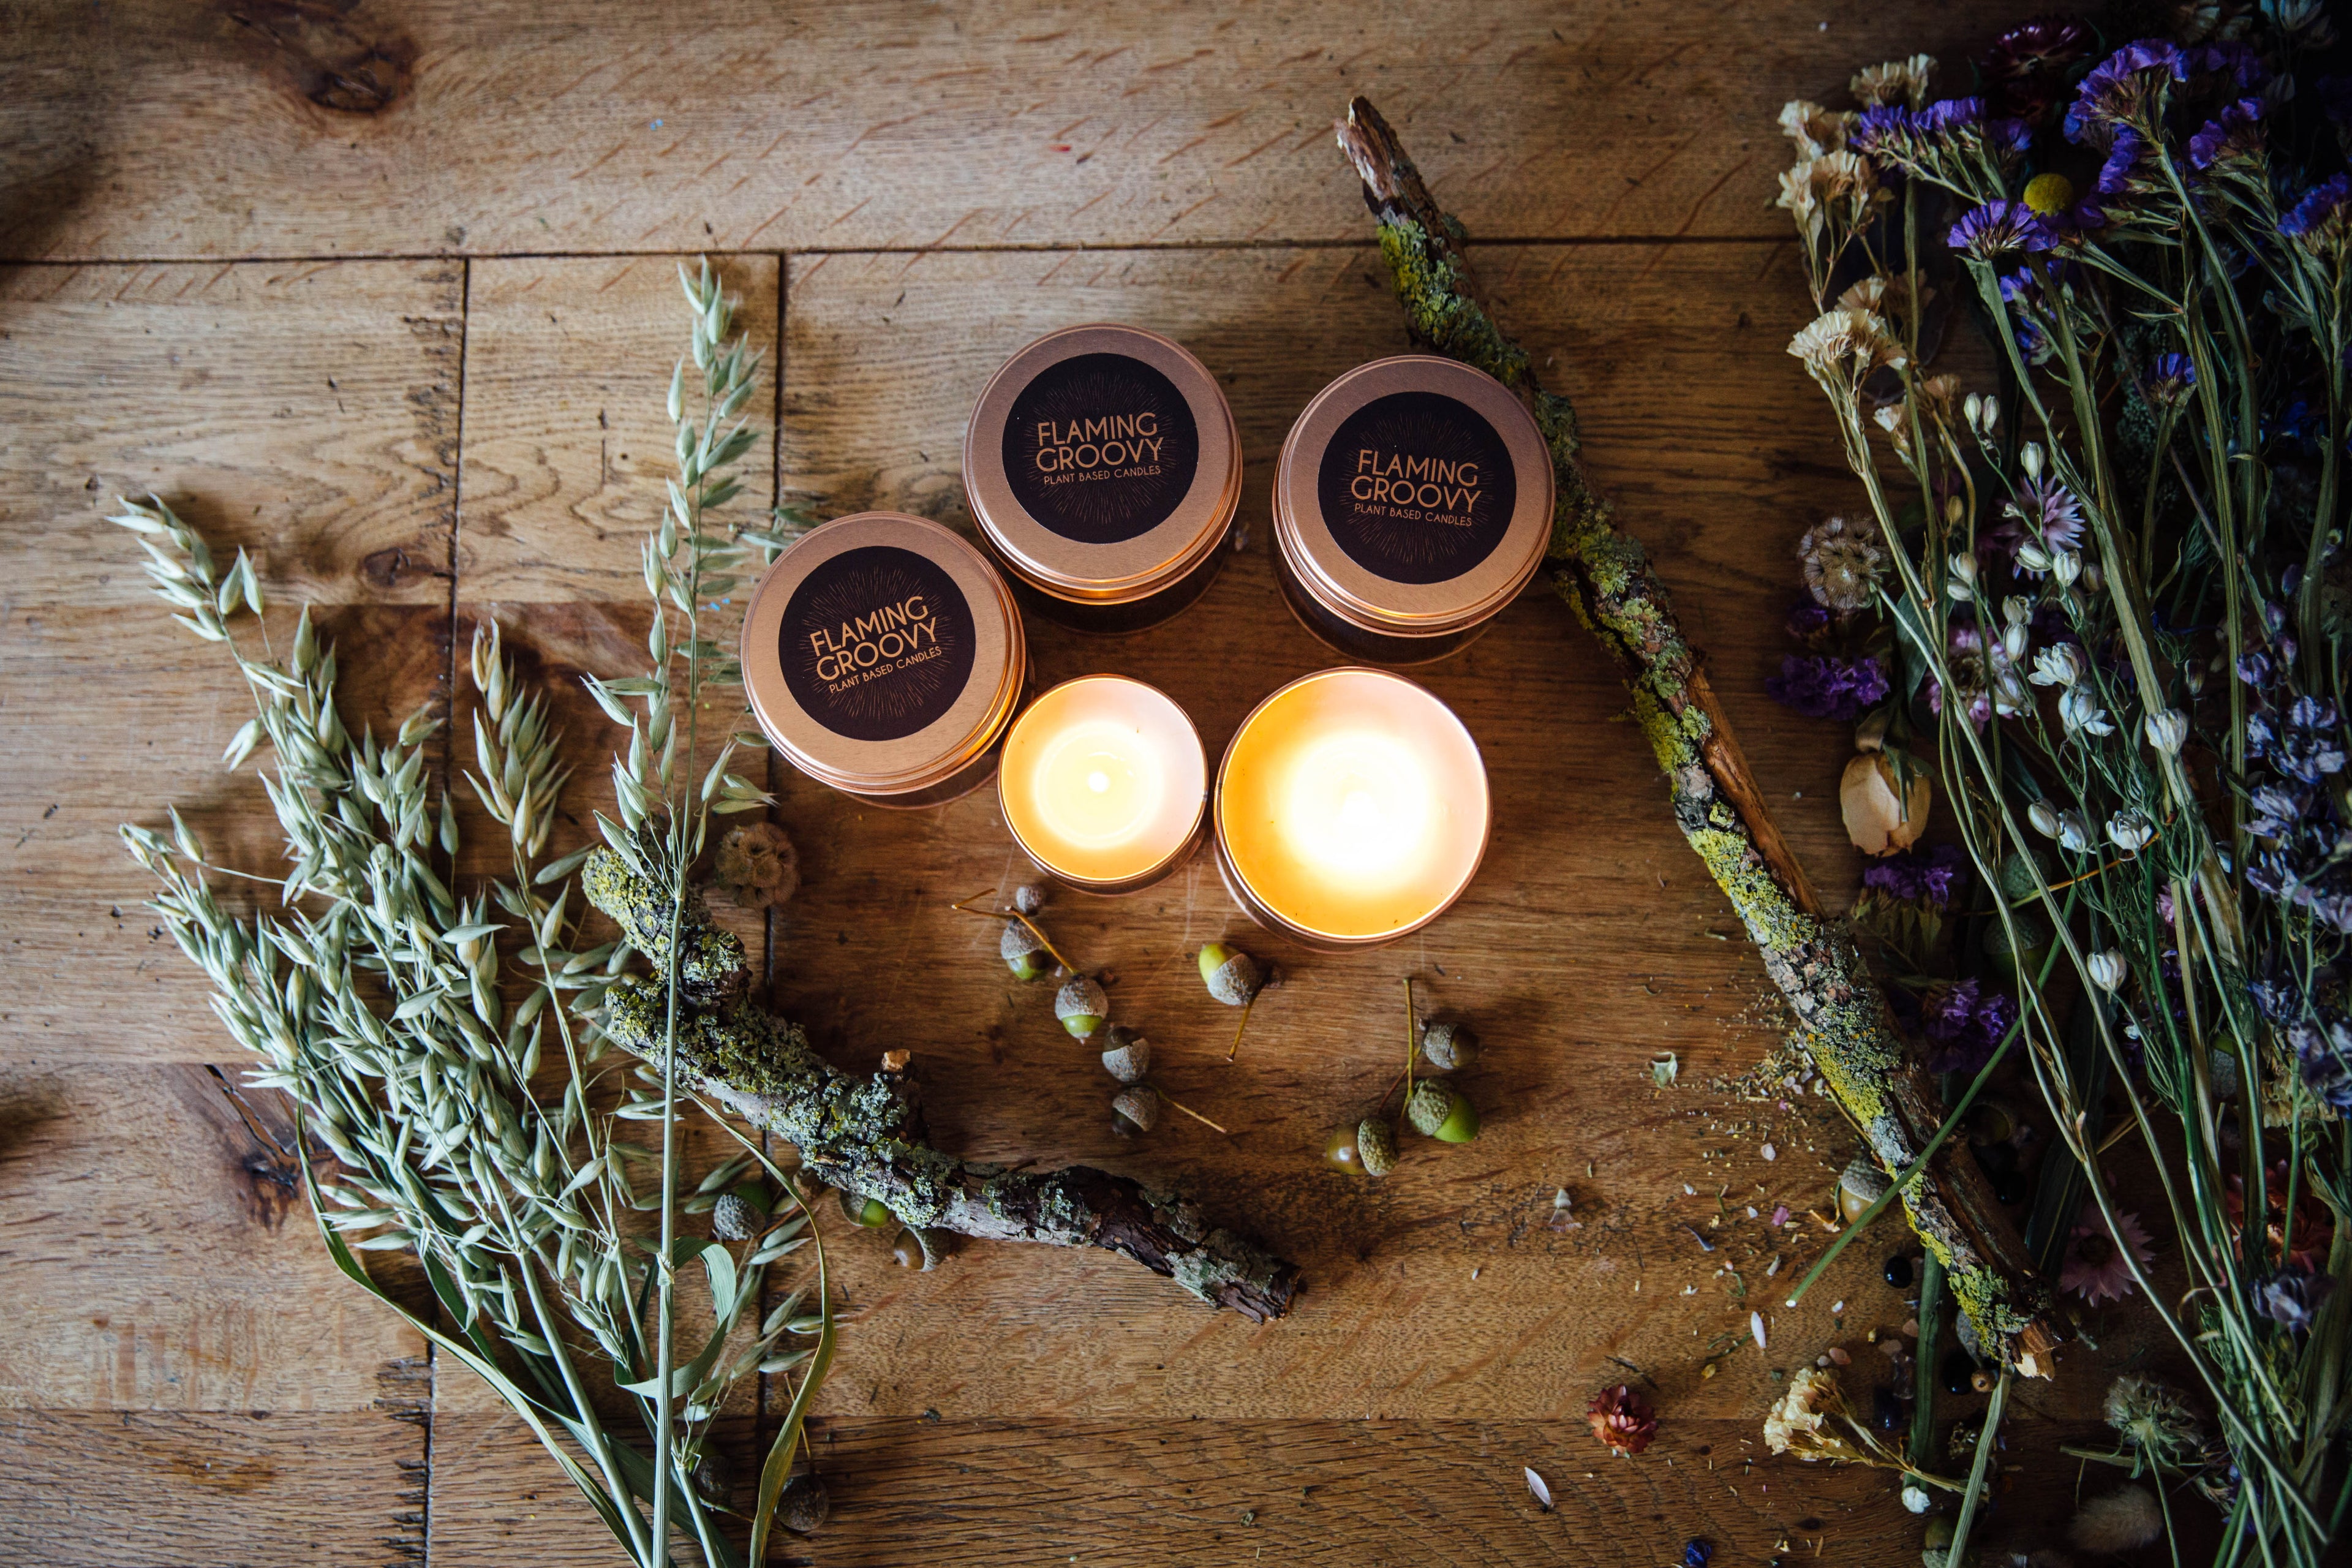 Rose gold flaming groovy candle tins, some lit, some not. Herbs and grasses on wooden background.